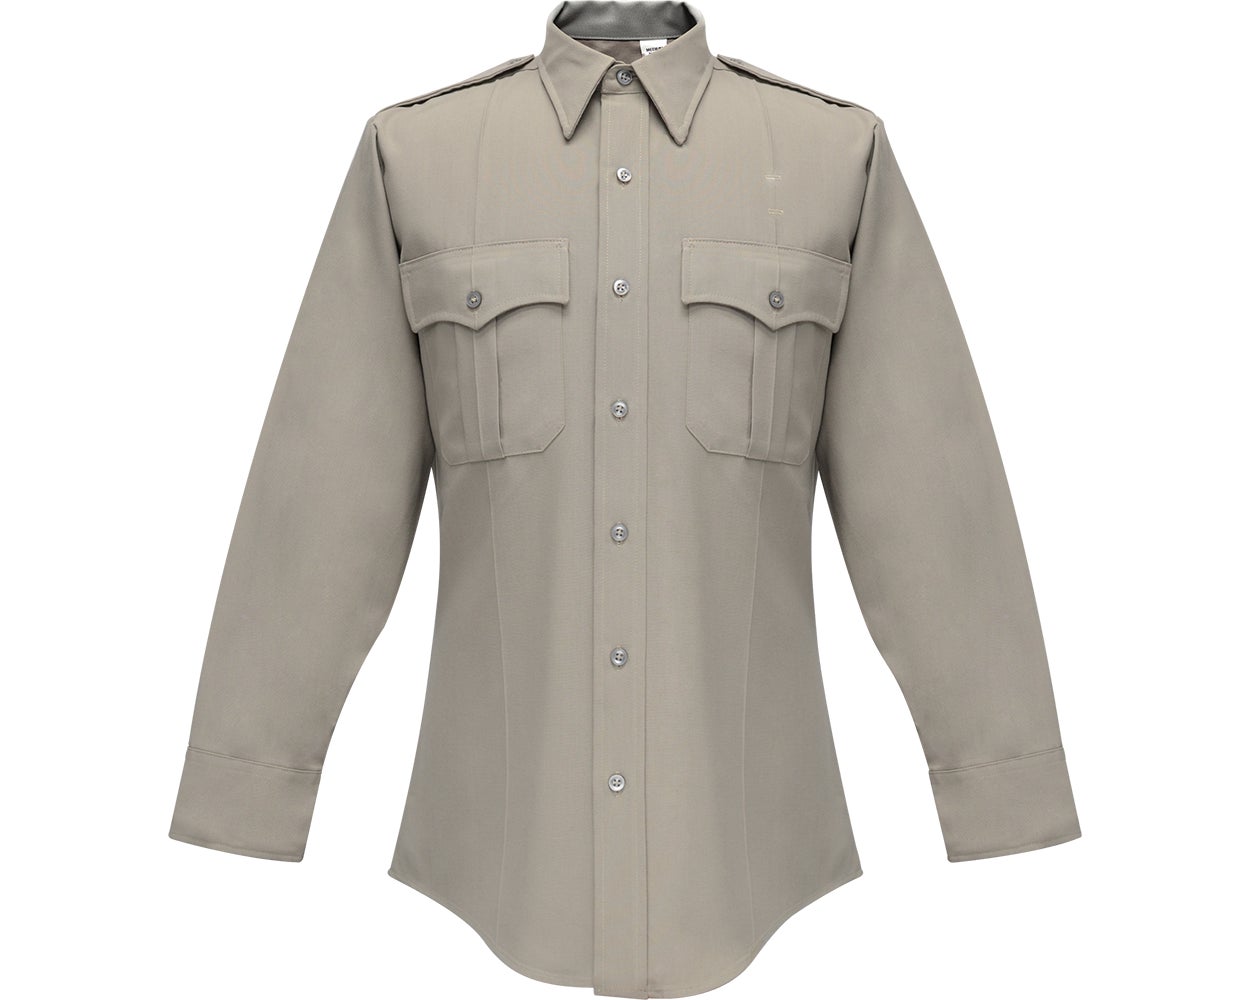 Flying Cross Deluxe Tropical 65% Poly/35% Rayon Long Sleeve Uniform Shirt with Pleated Pockets 45W66 - Nickel Gray, 15 x 32-33